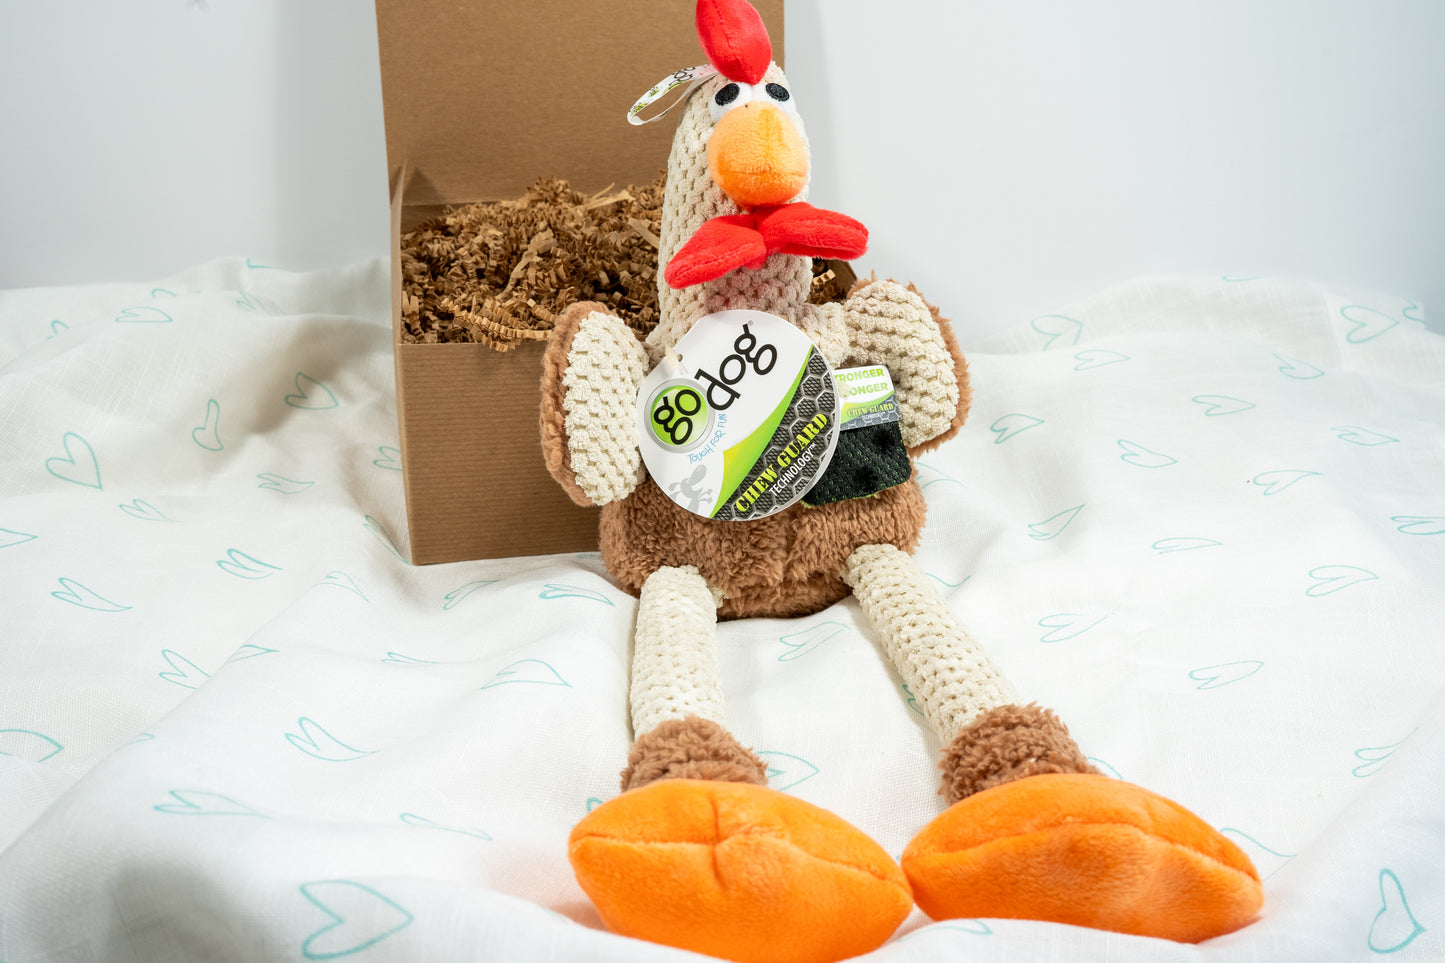 Large squeaker brown chicken plush dog toy constructed from a soft, textured, checkered plush.